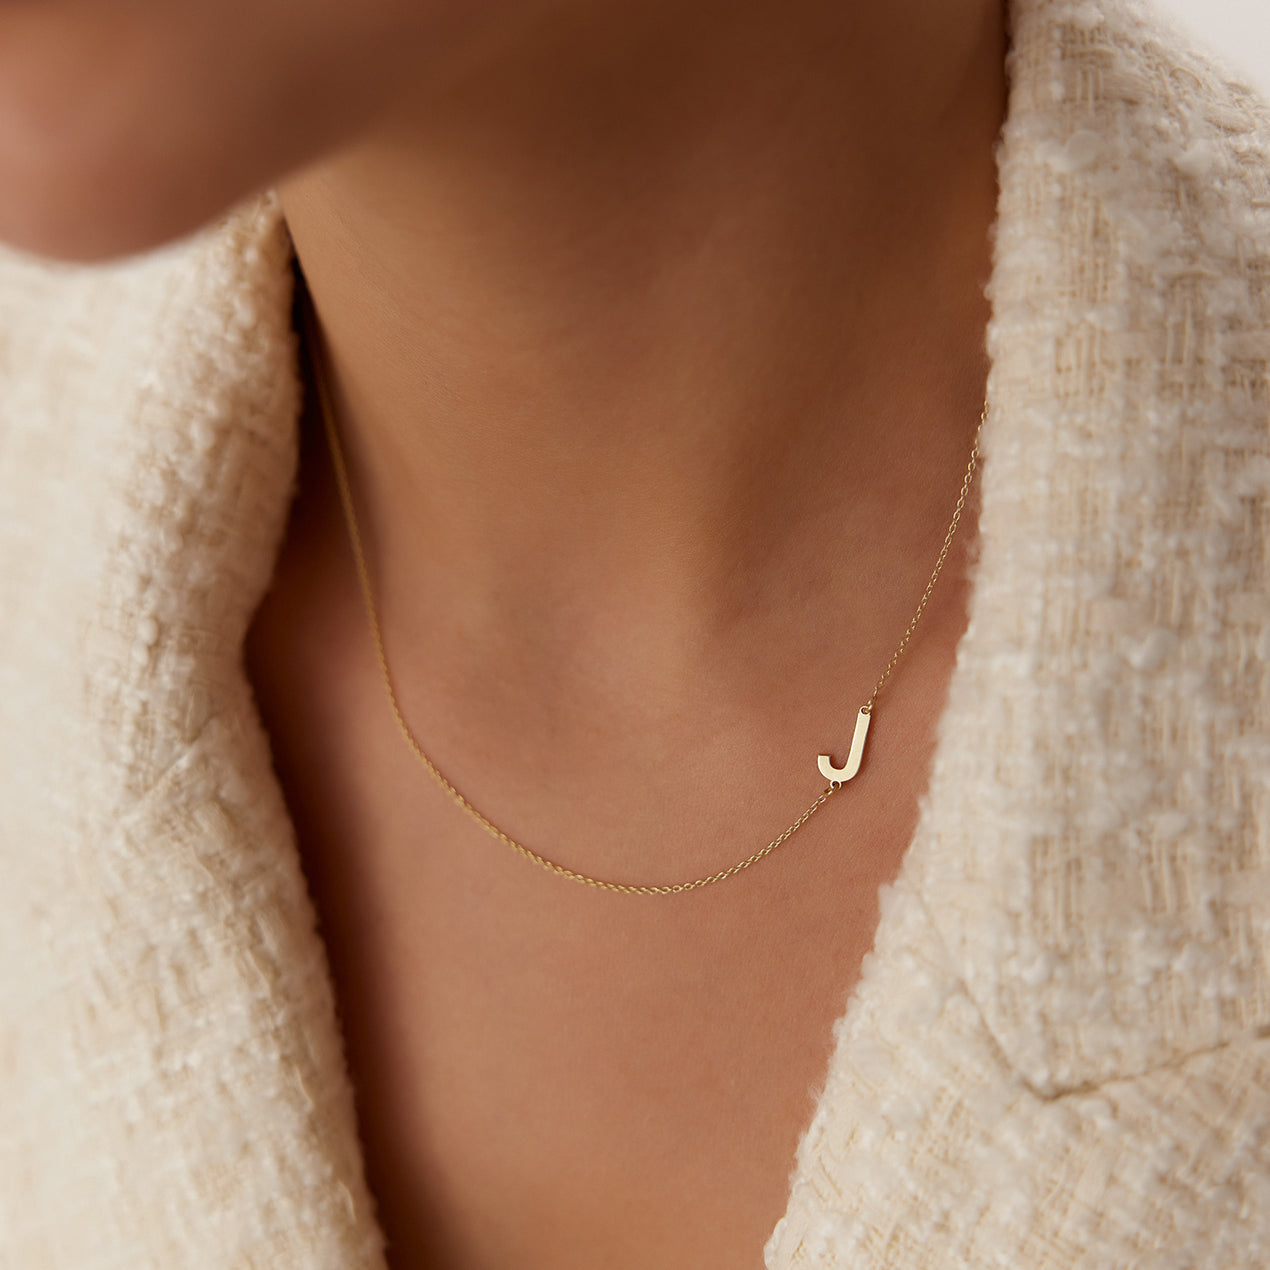 Amazon.com: Personalized 14k Gold Sideways Diamond Initial Necklace -  Custom Pave Diamond Letter Charm - Ideal Gift for Her, Christmas, Mother's  Day - Elegant Gold Jewelry : Handmade Products